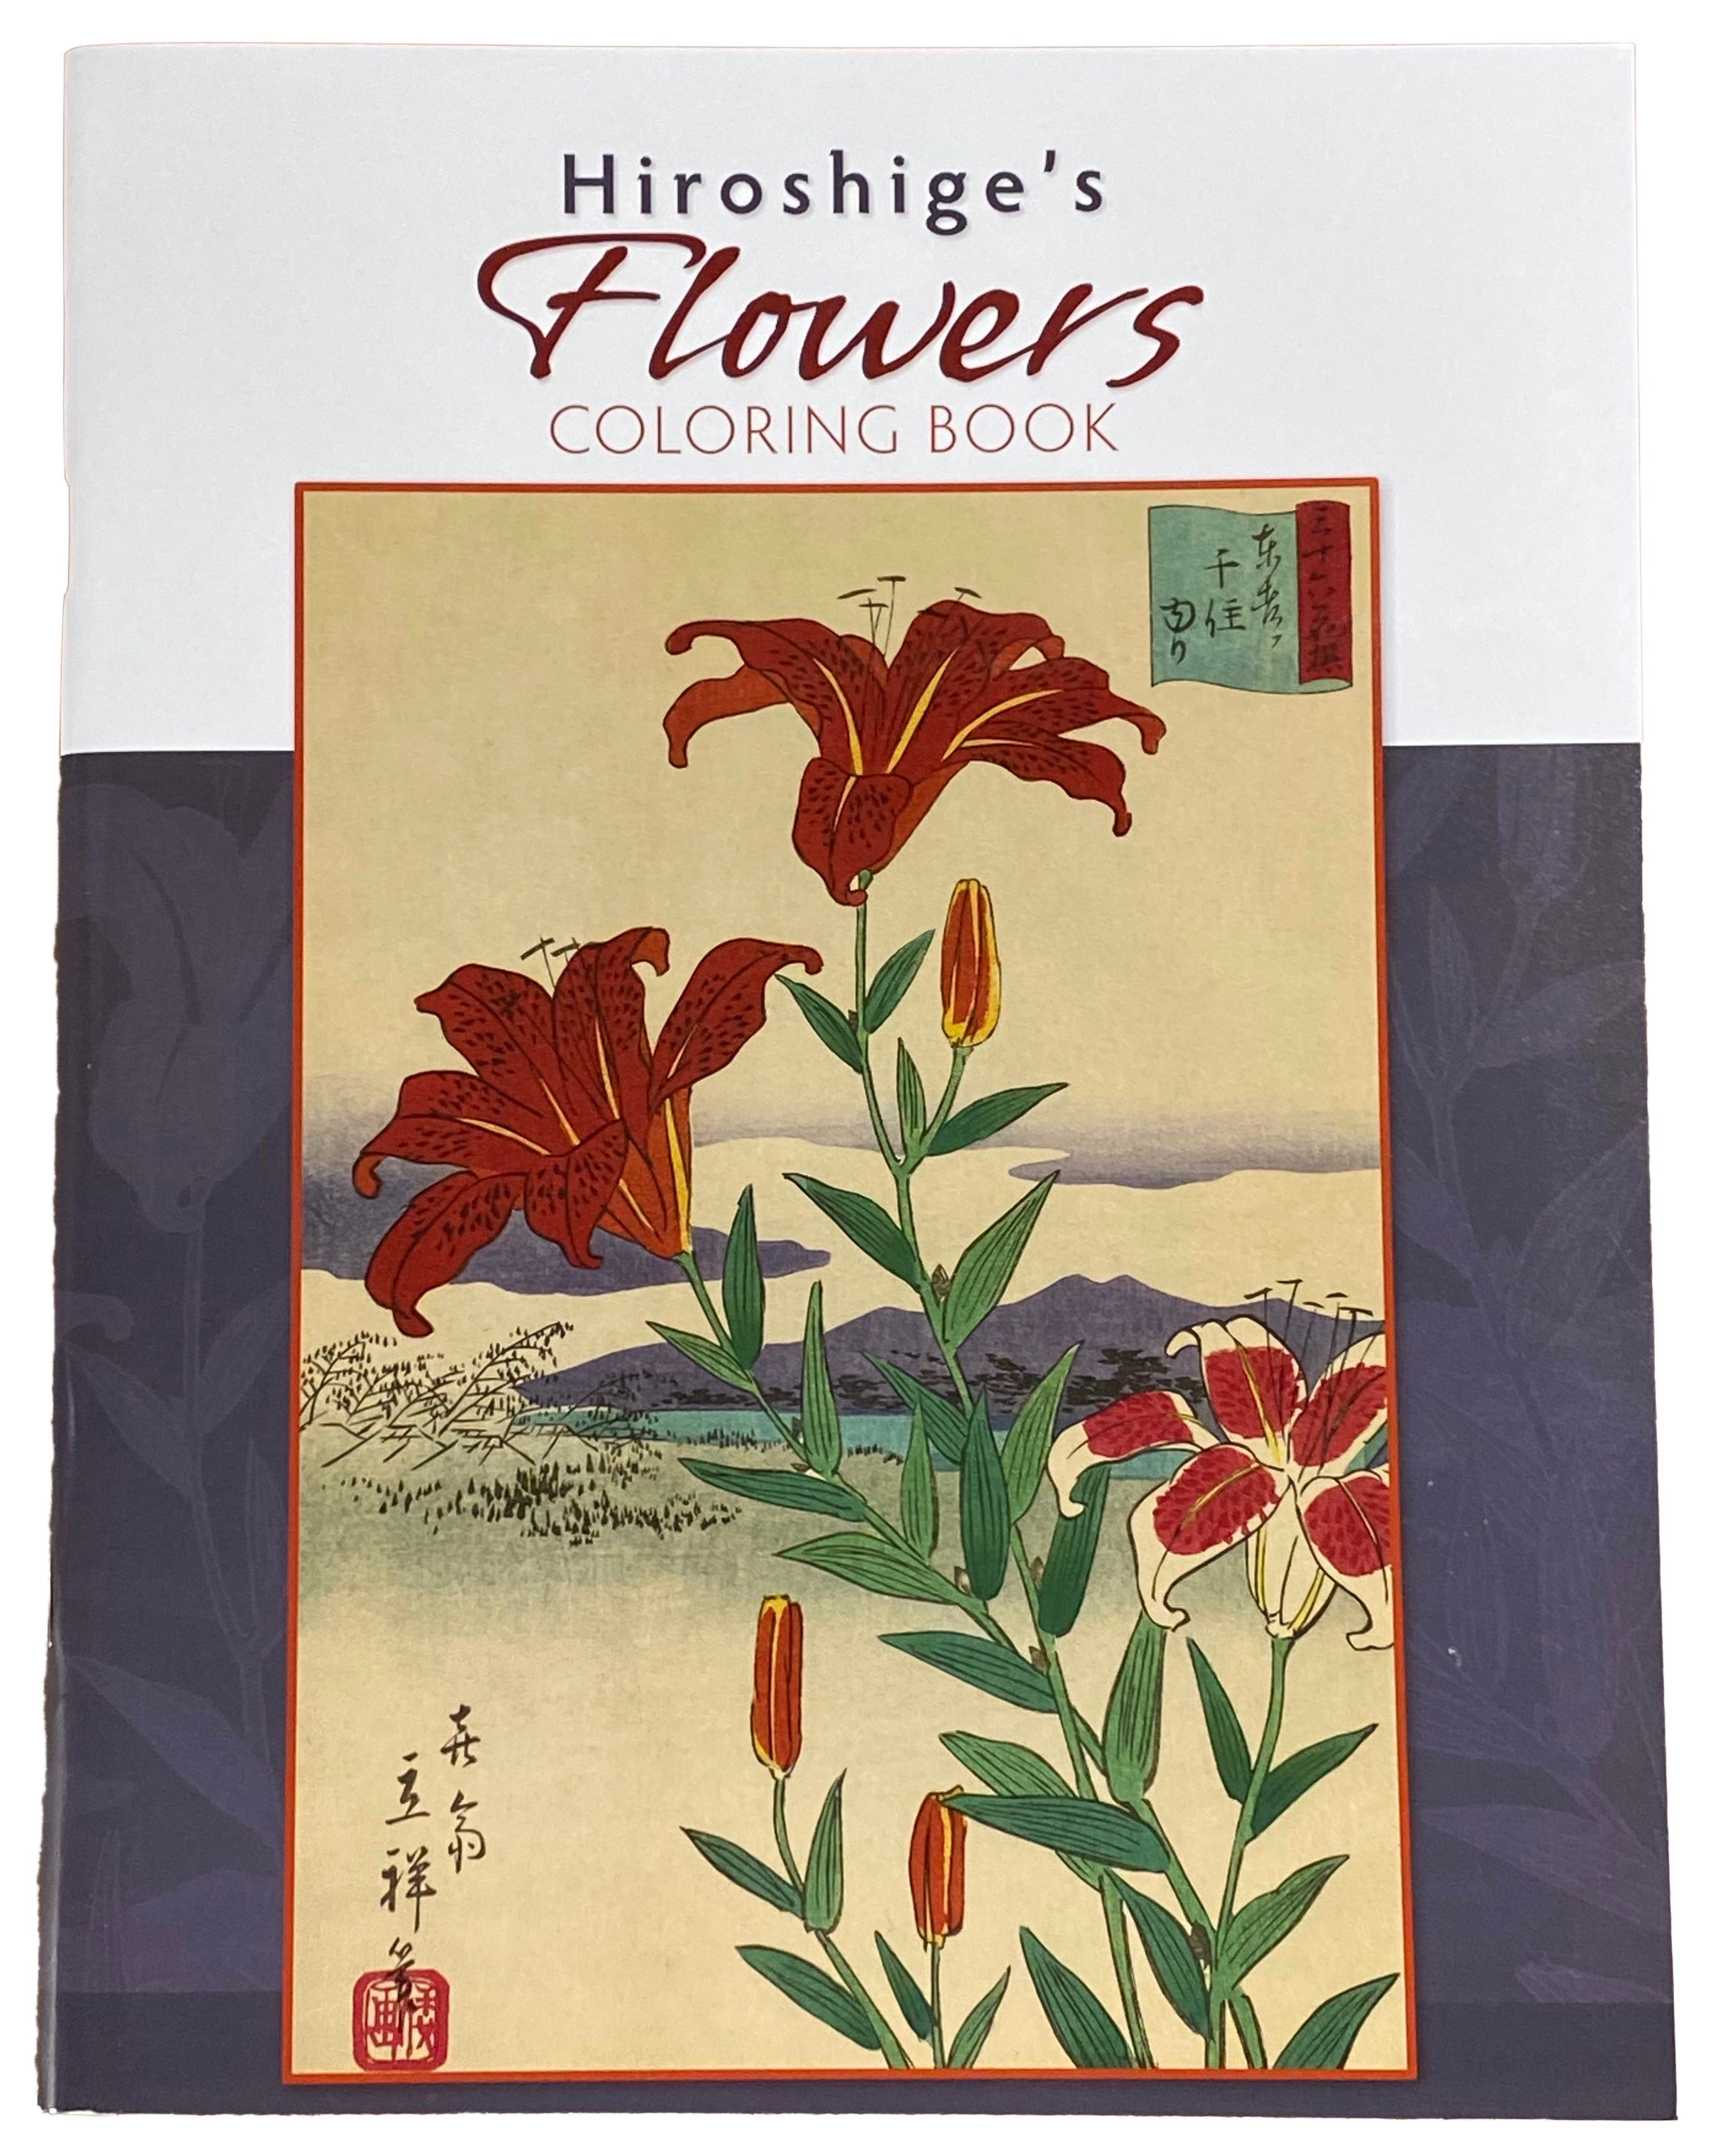 Hiroshige's Flowers Coloring Book    